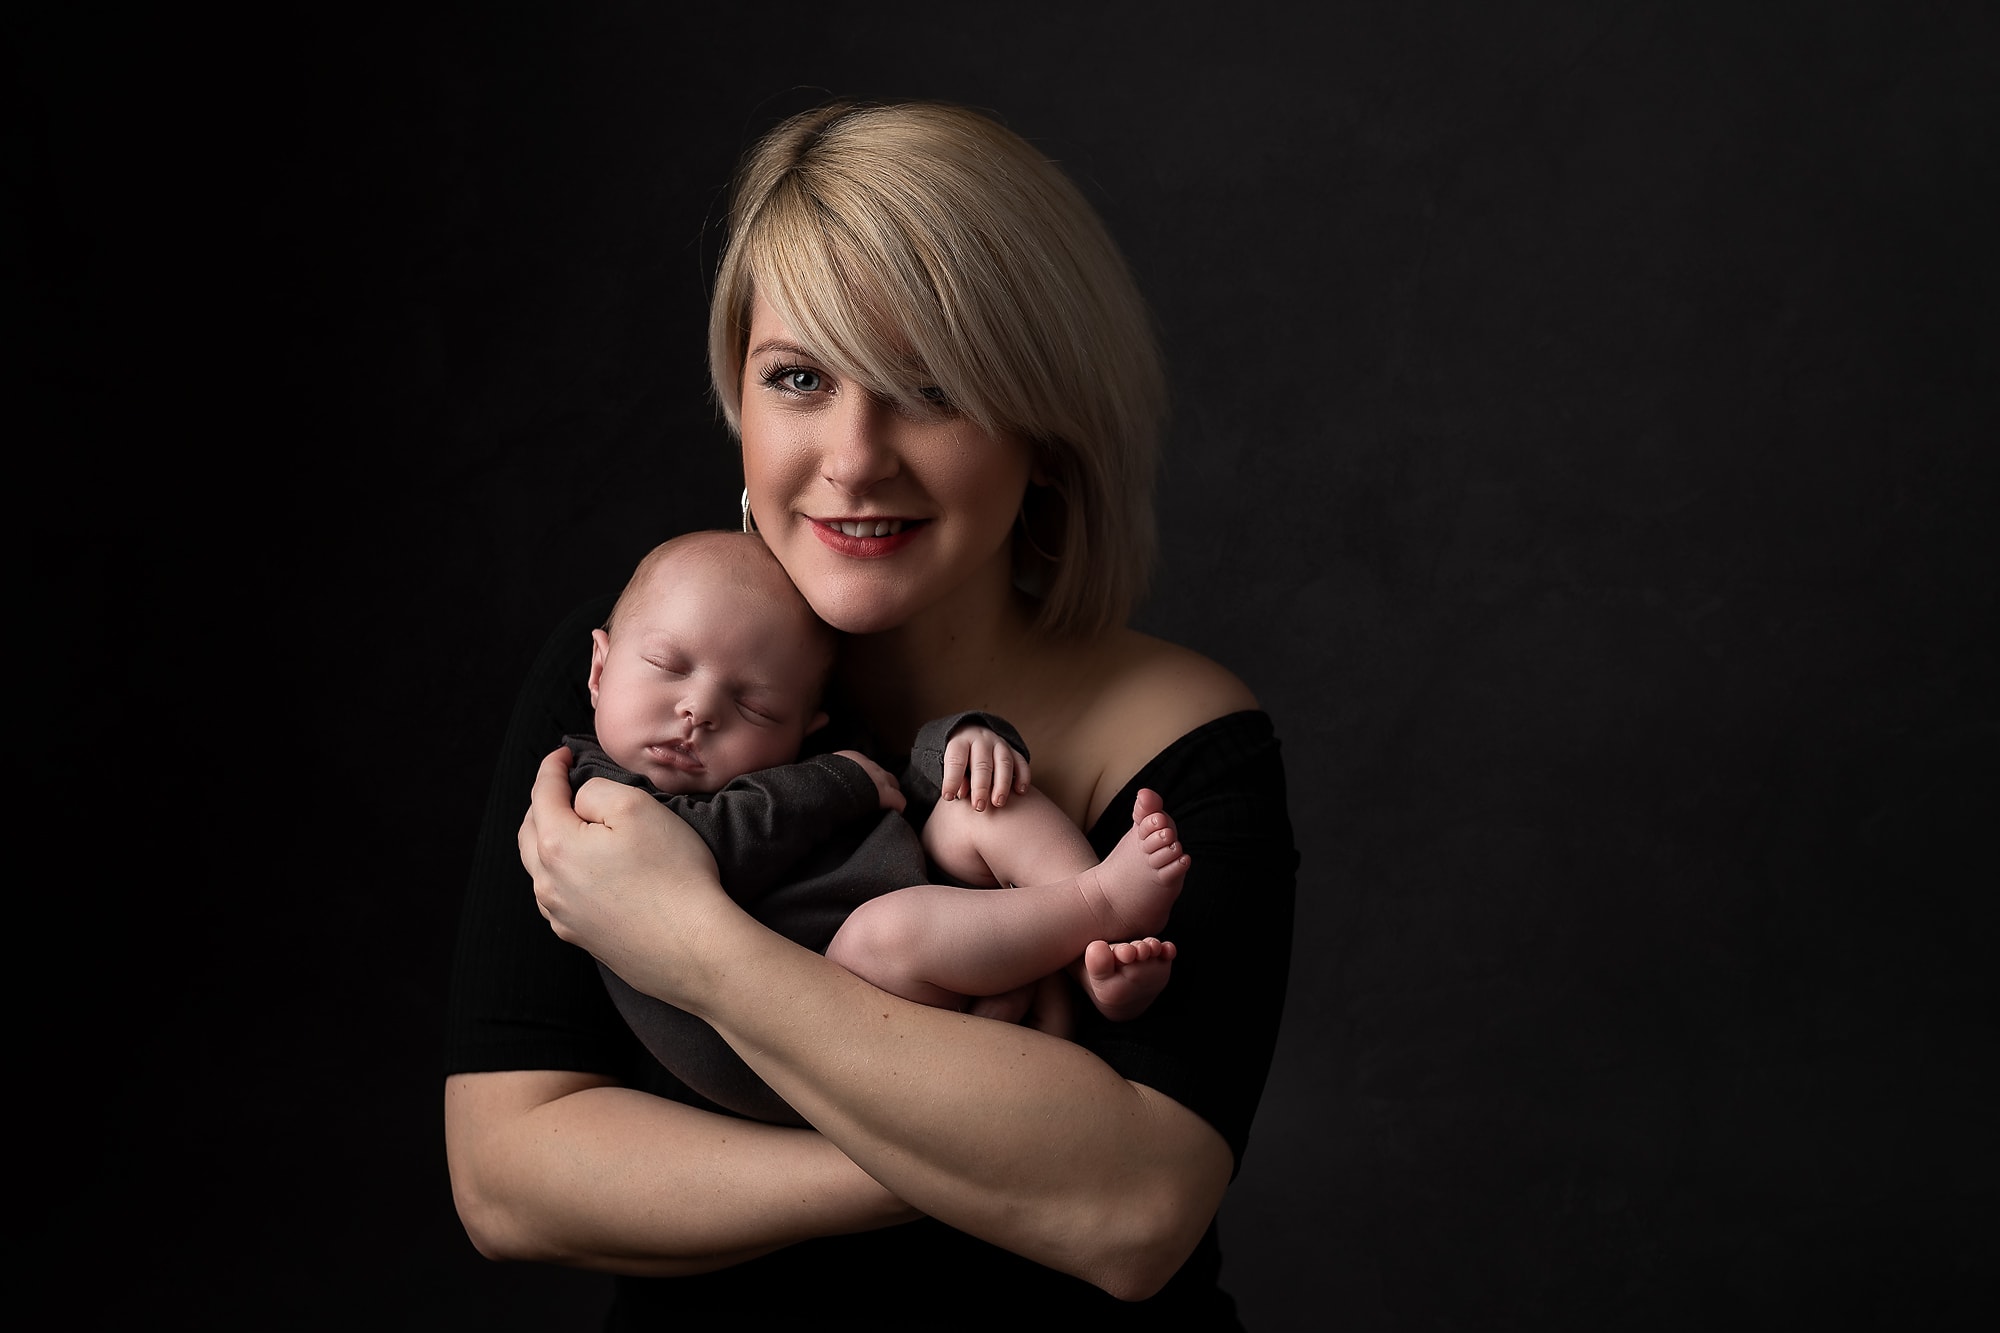 Newborn and Family Photography Mum and Baby Tianna J-Williams Photography